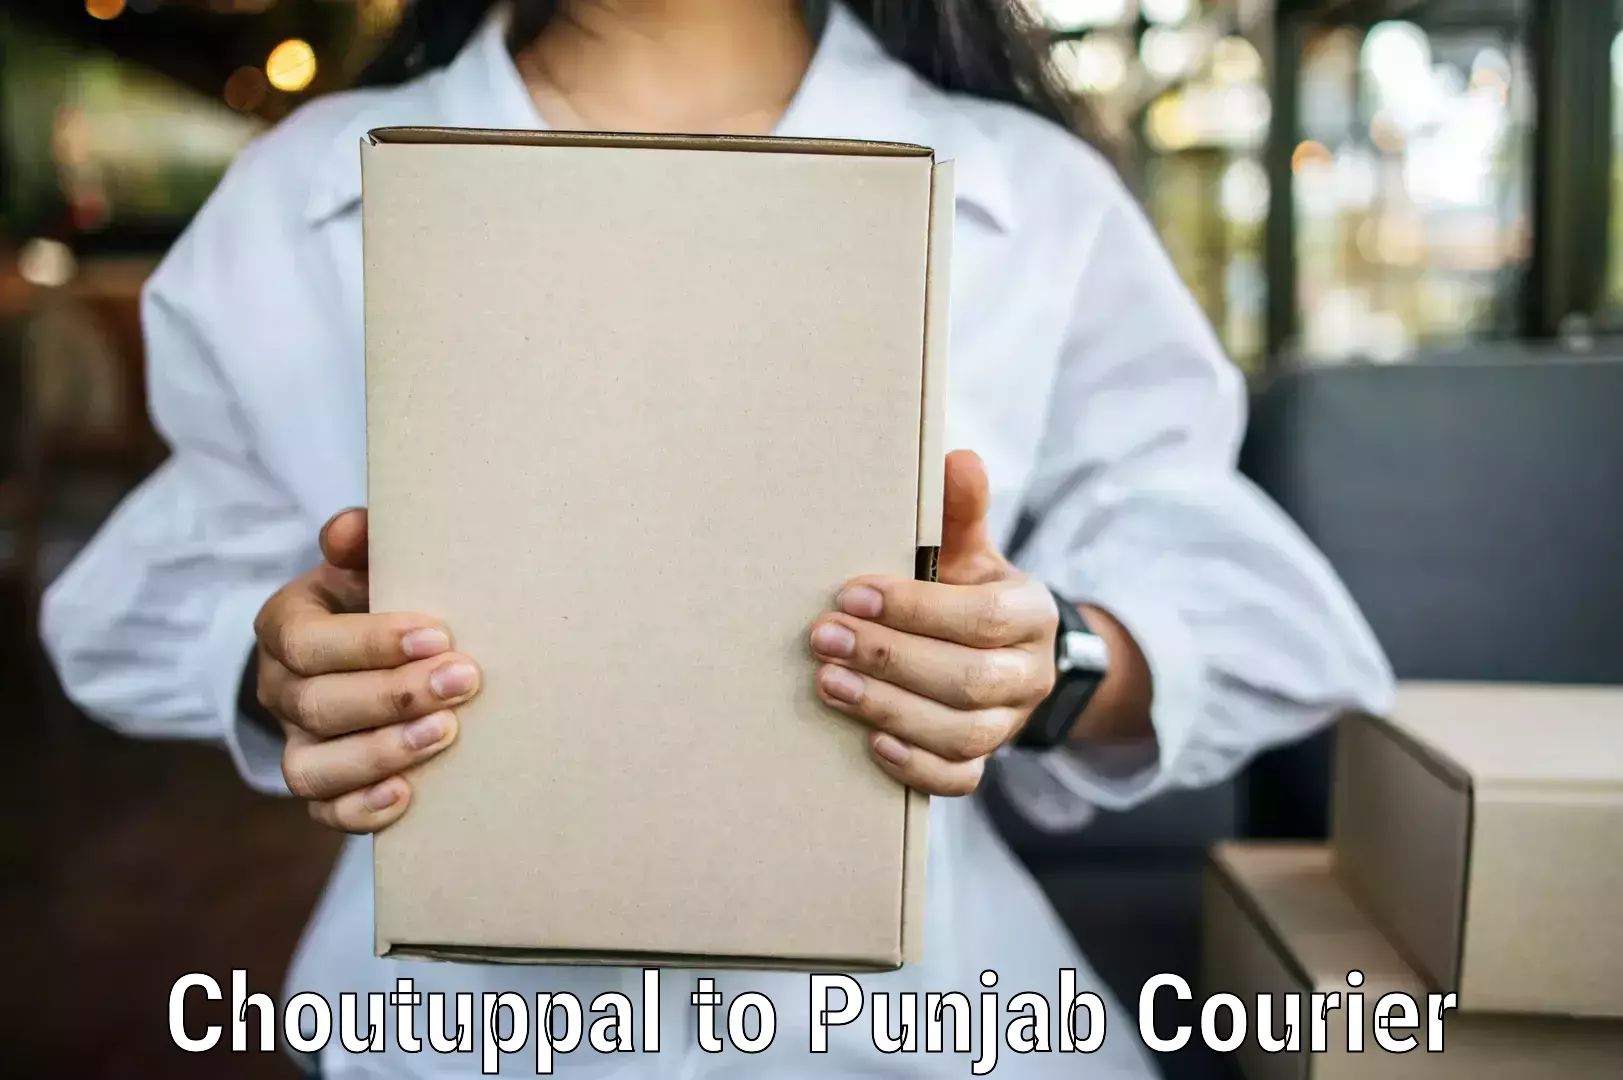 Delivery service partnership Choutuppal to Sangrur